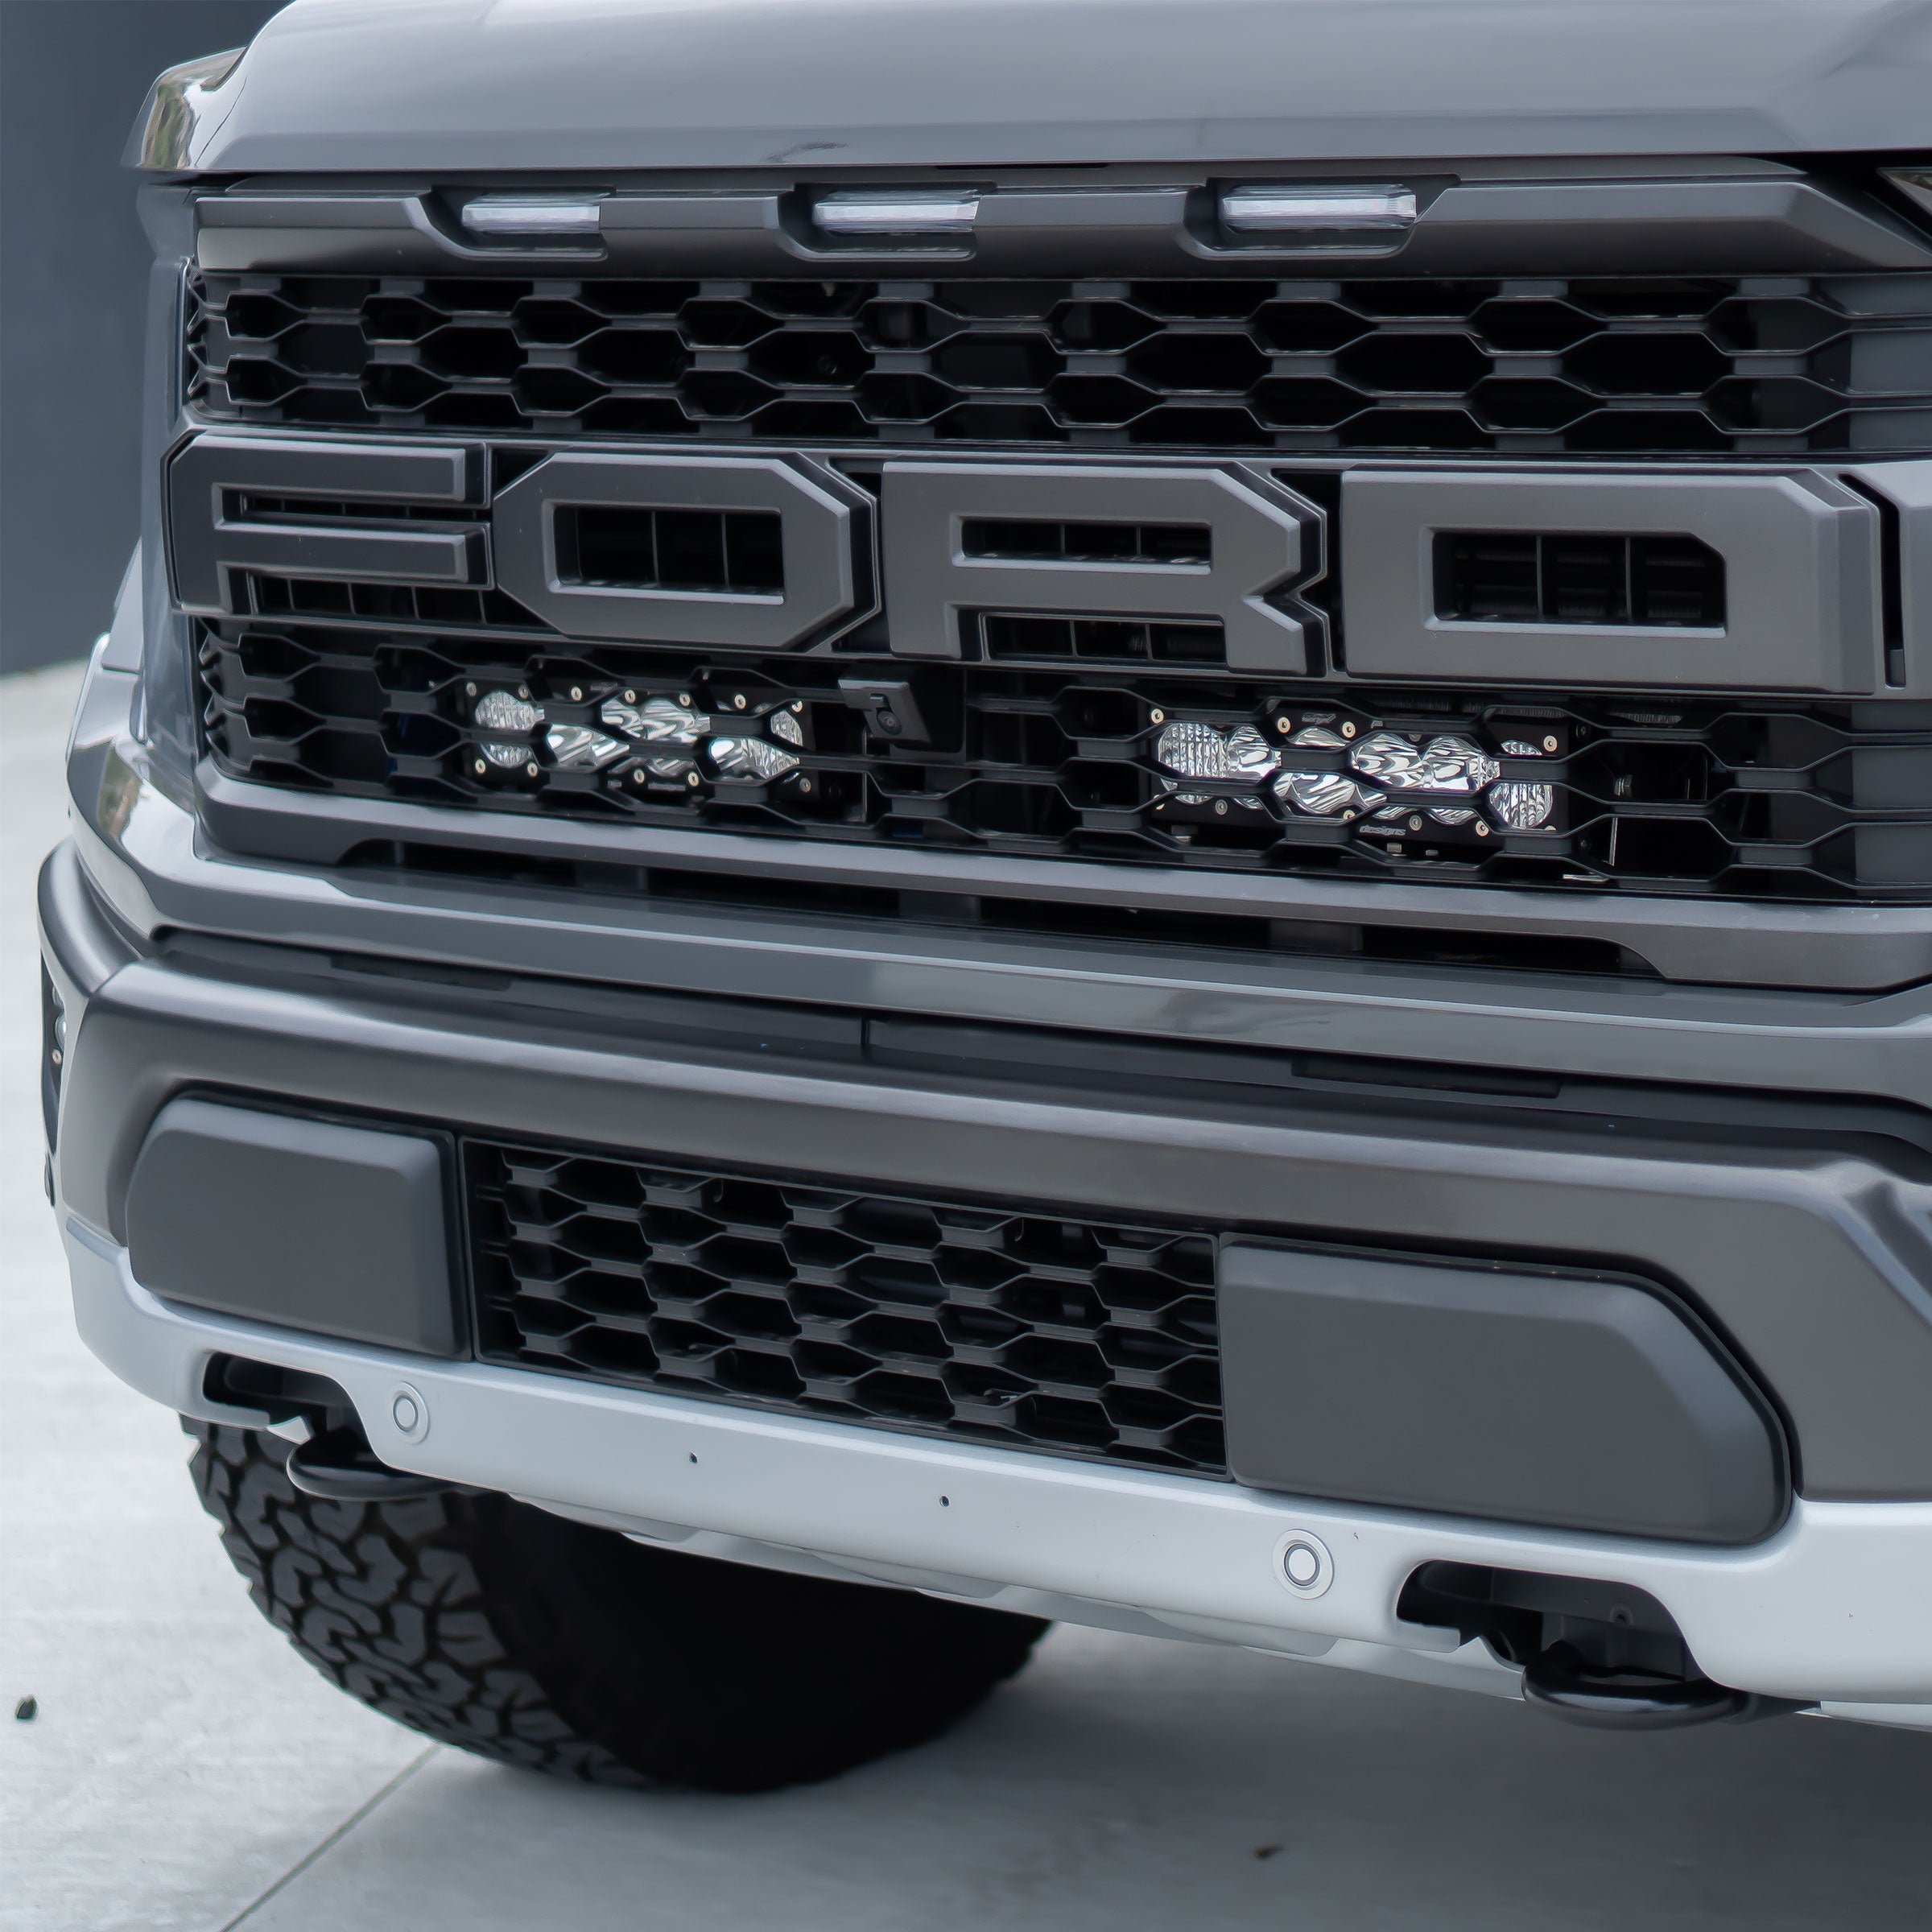 SPV Customizable - Baja Designs OnX6+ 10 Inch Dual Behind Grille Light Kit fits 21-On Ford Raptor